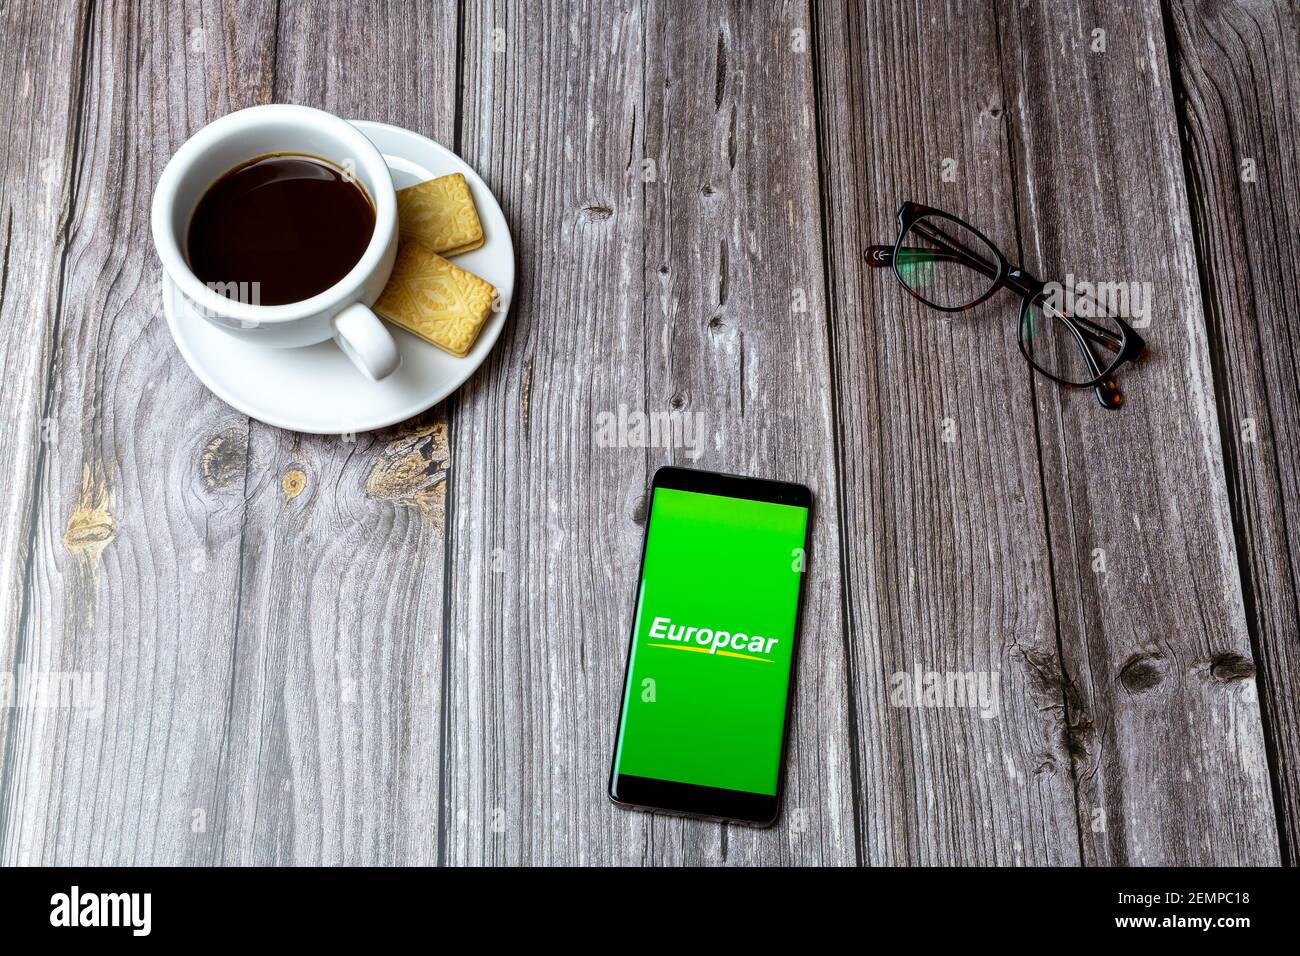 A mobile phone or cell phone on a wooden table with the Europcar app open next to a coffee and glasses Stock Photo